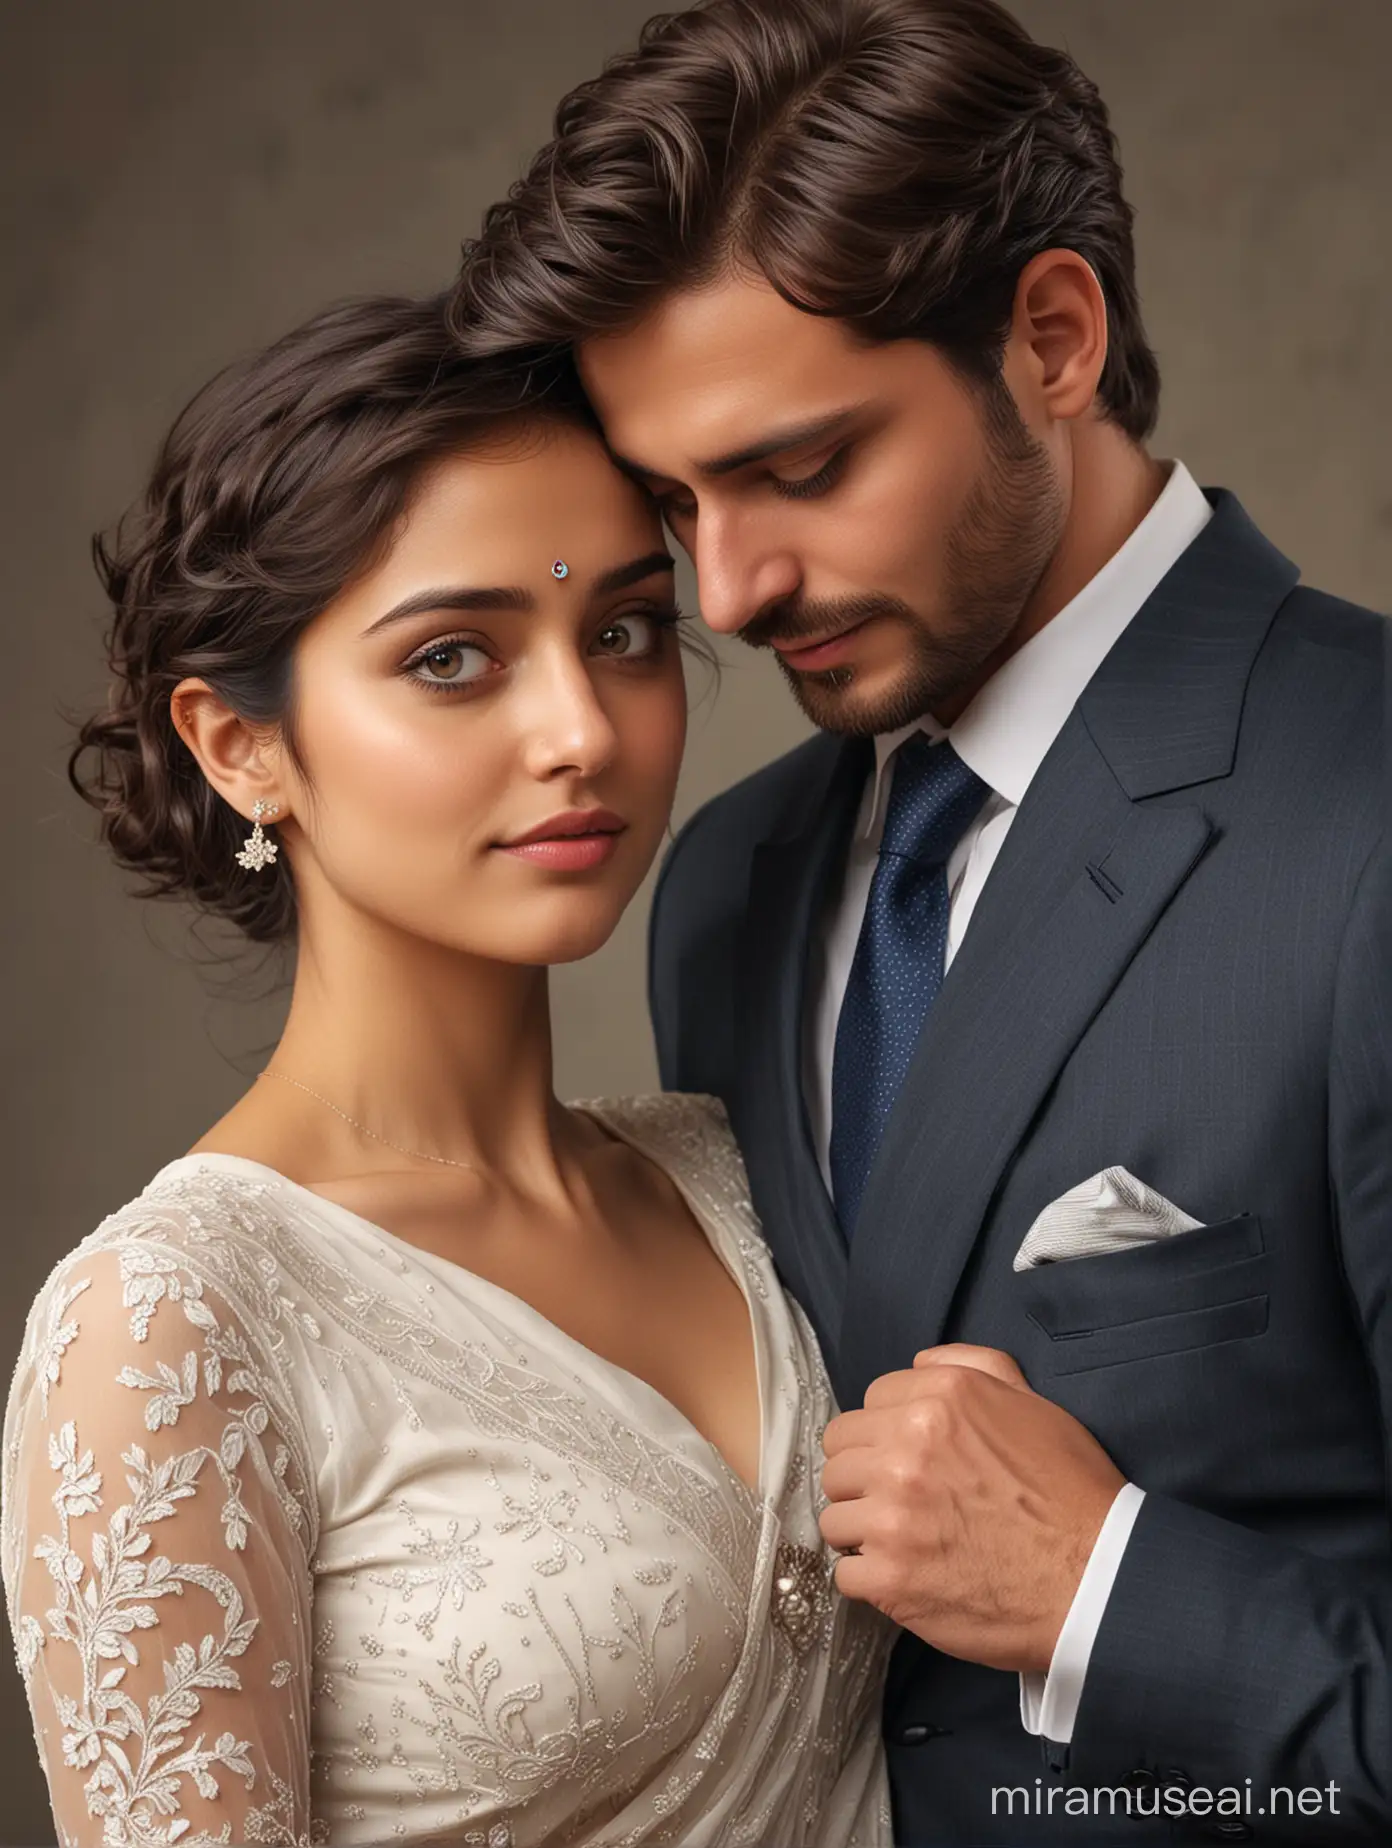 couple, most handsome full body photo of elegant white smart european male, short hair cut, wide big eyes, full face, formals with tie, elegant looks, beard, most beautiful cute indian girl, elegant saree, low cut back, full makeup, curly long hair, girl holding man from behind hands holding ,  head resting on man's chest with emotional reunited feeling, low cut back, man comforting girl,
photo realistic, 4k.